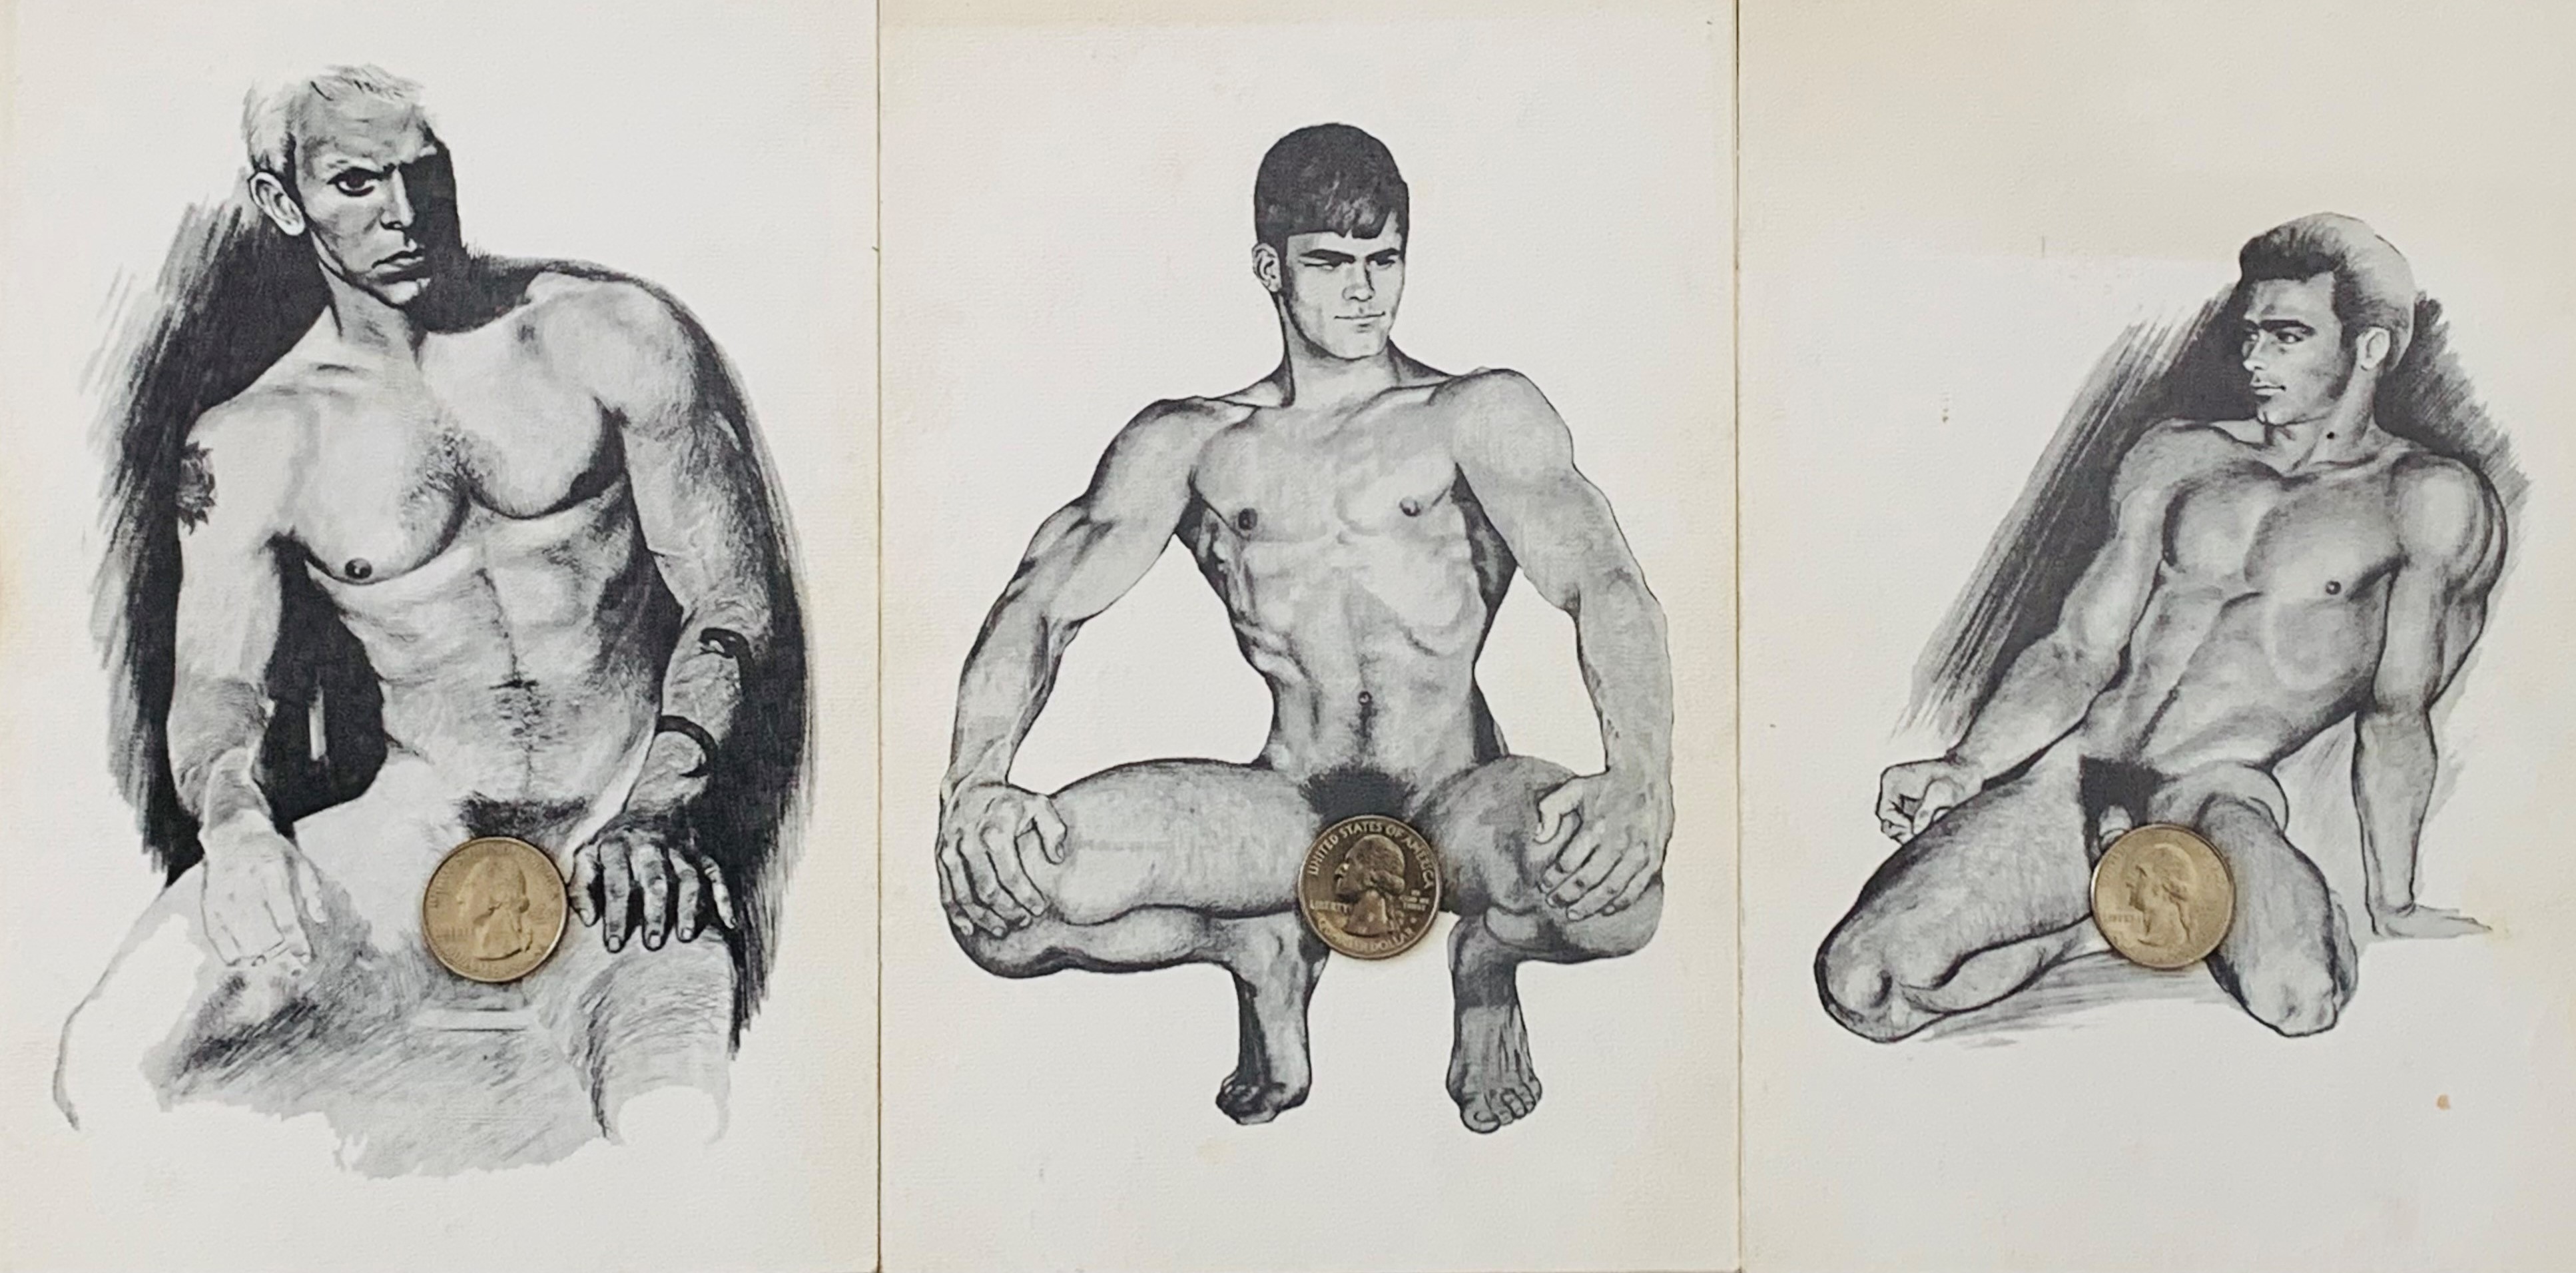 (JOHNSON, JOE). Johnson, Joe - JOE JOHNSON: THREE SELF-PUBLISHED 1960s MALE NUDE GREETING CARDS